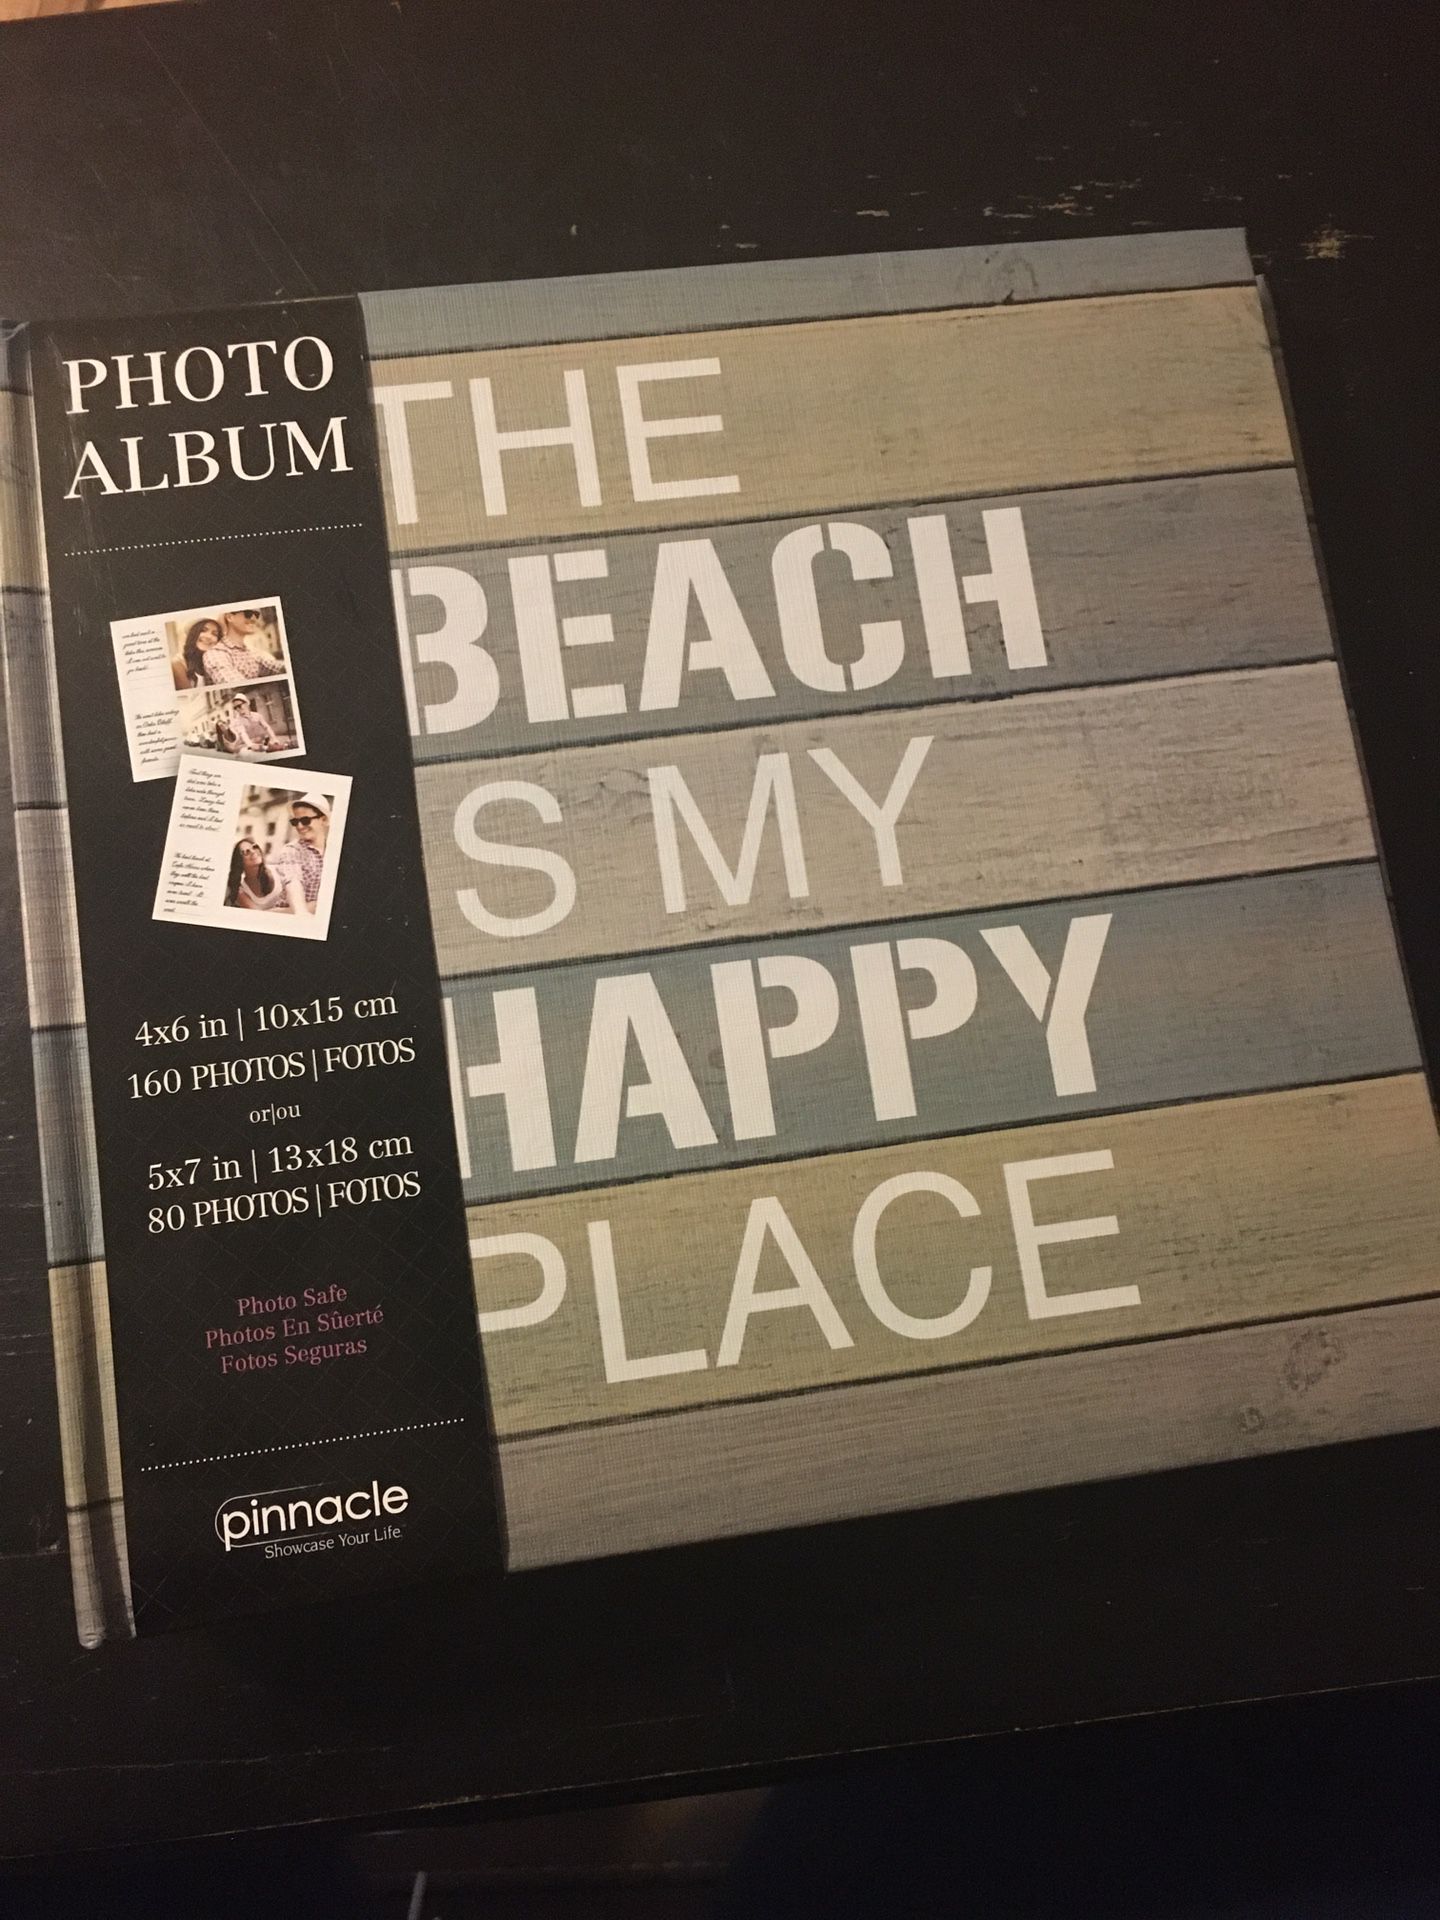 NWT Pinnacle Photo Album “The Beach is My Happy Place” 4x6 or 5x7